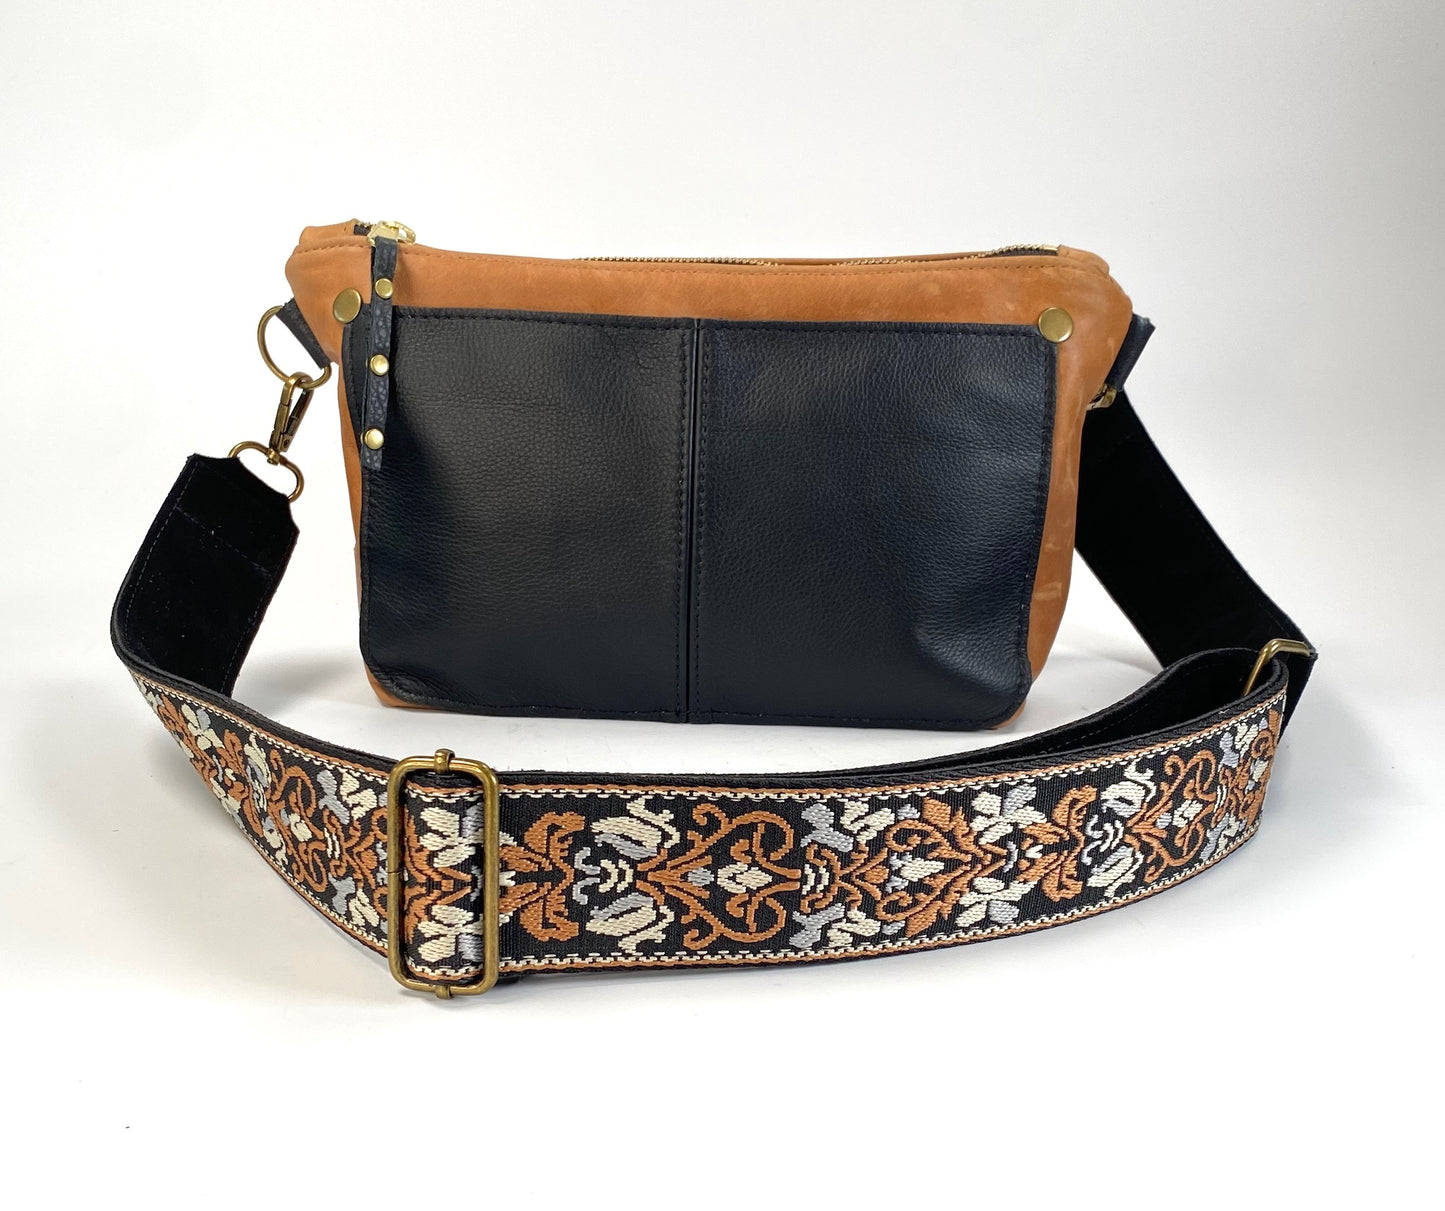 Tan & Black Leather Crossbody Purse with Coordinating Strap